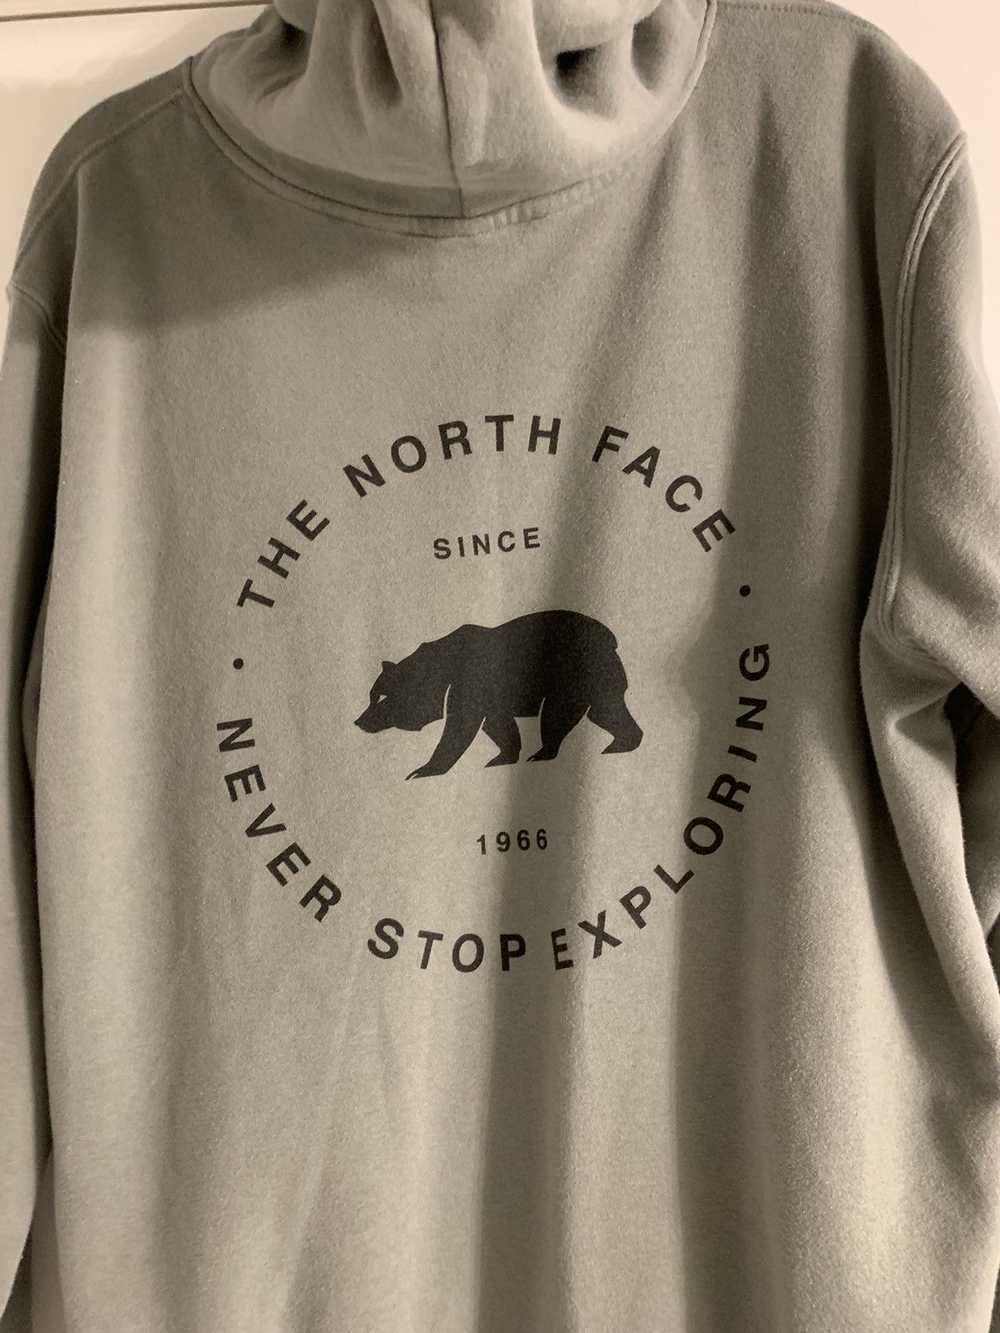 The North Face North Face Sweatshirt - image 4